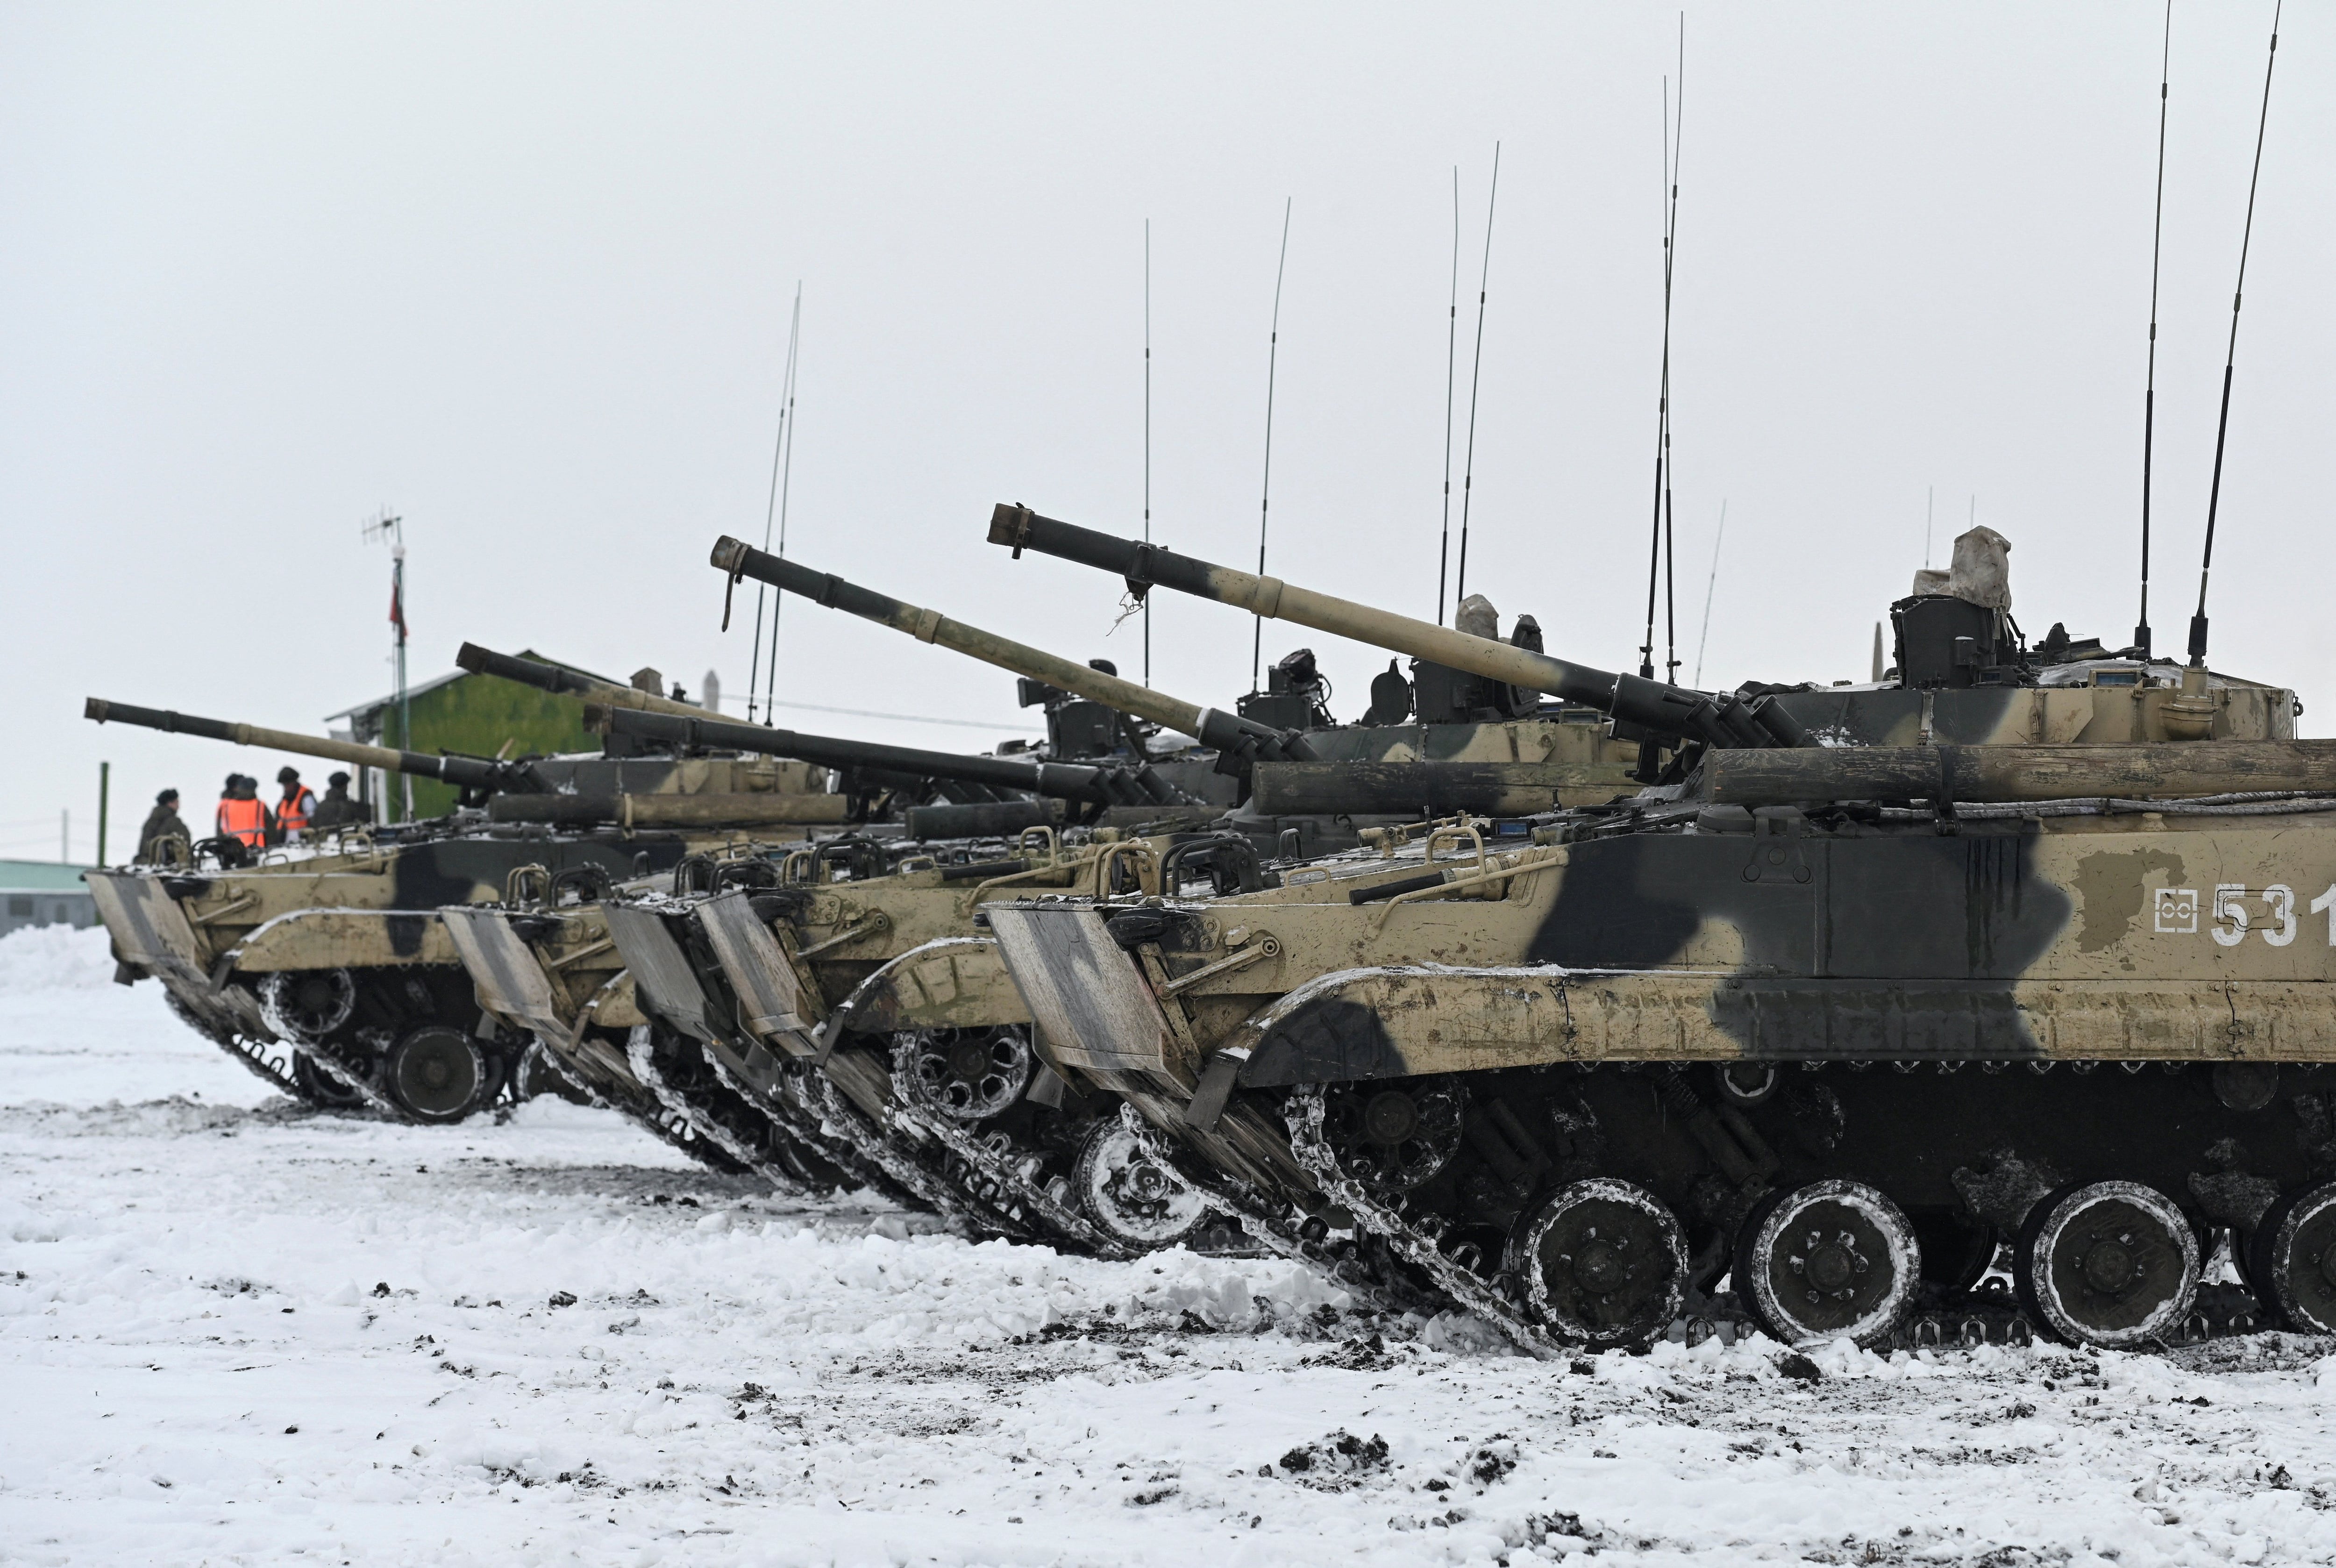 Russian BMP-3 infantry fighting vehicles during exercises conducted by the armed forces of the Southern Military District at the Kadamovsky firing range in the Rostov region, Russia, last Thursday.  (Photo: Reuters)